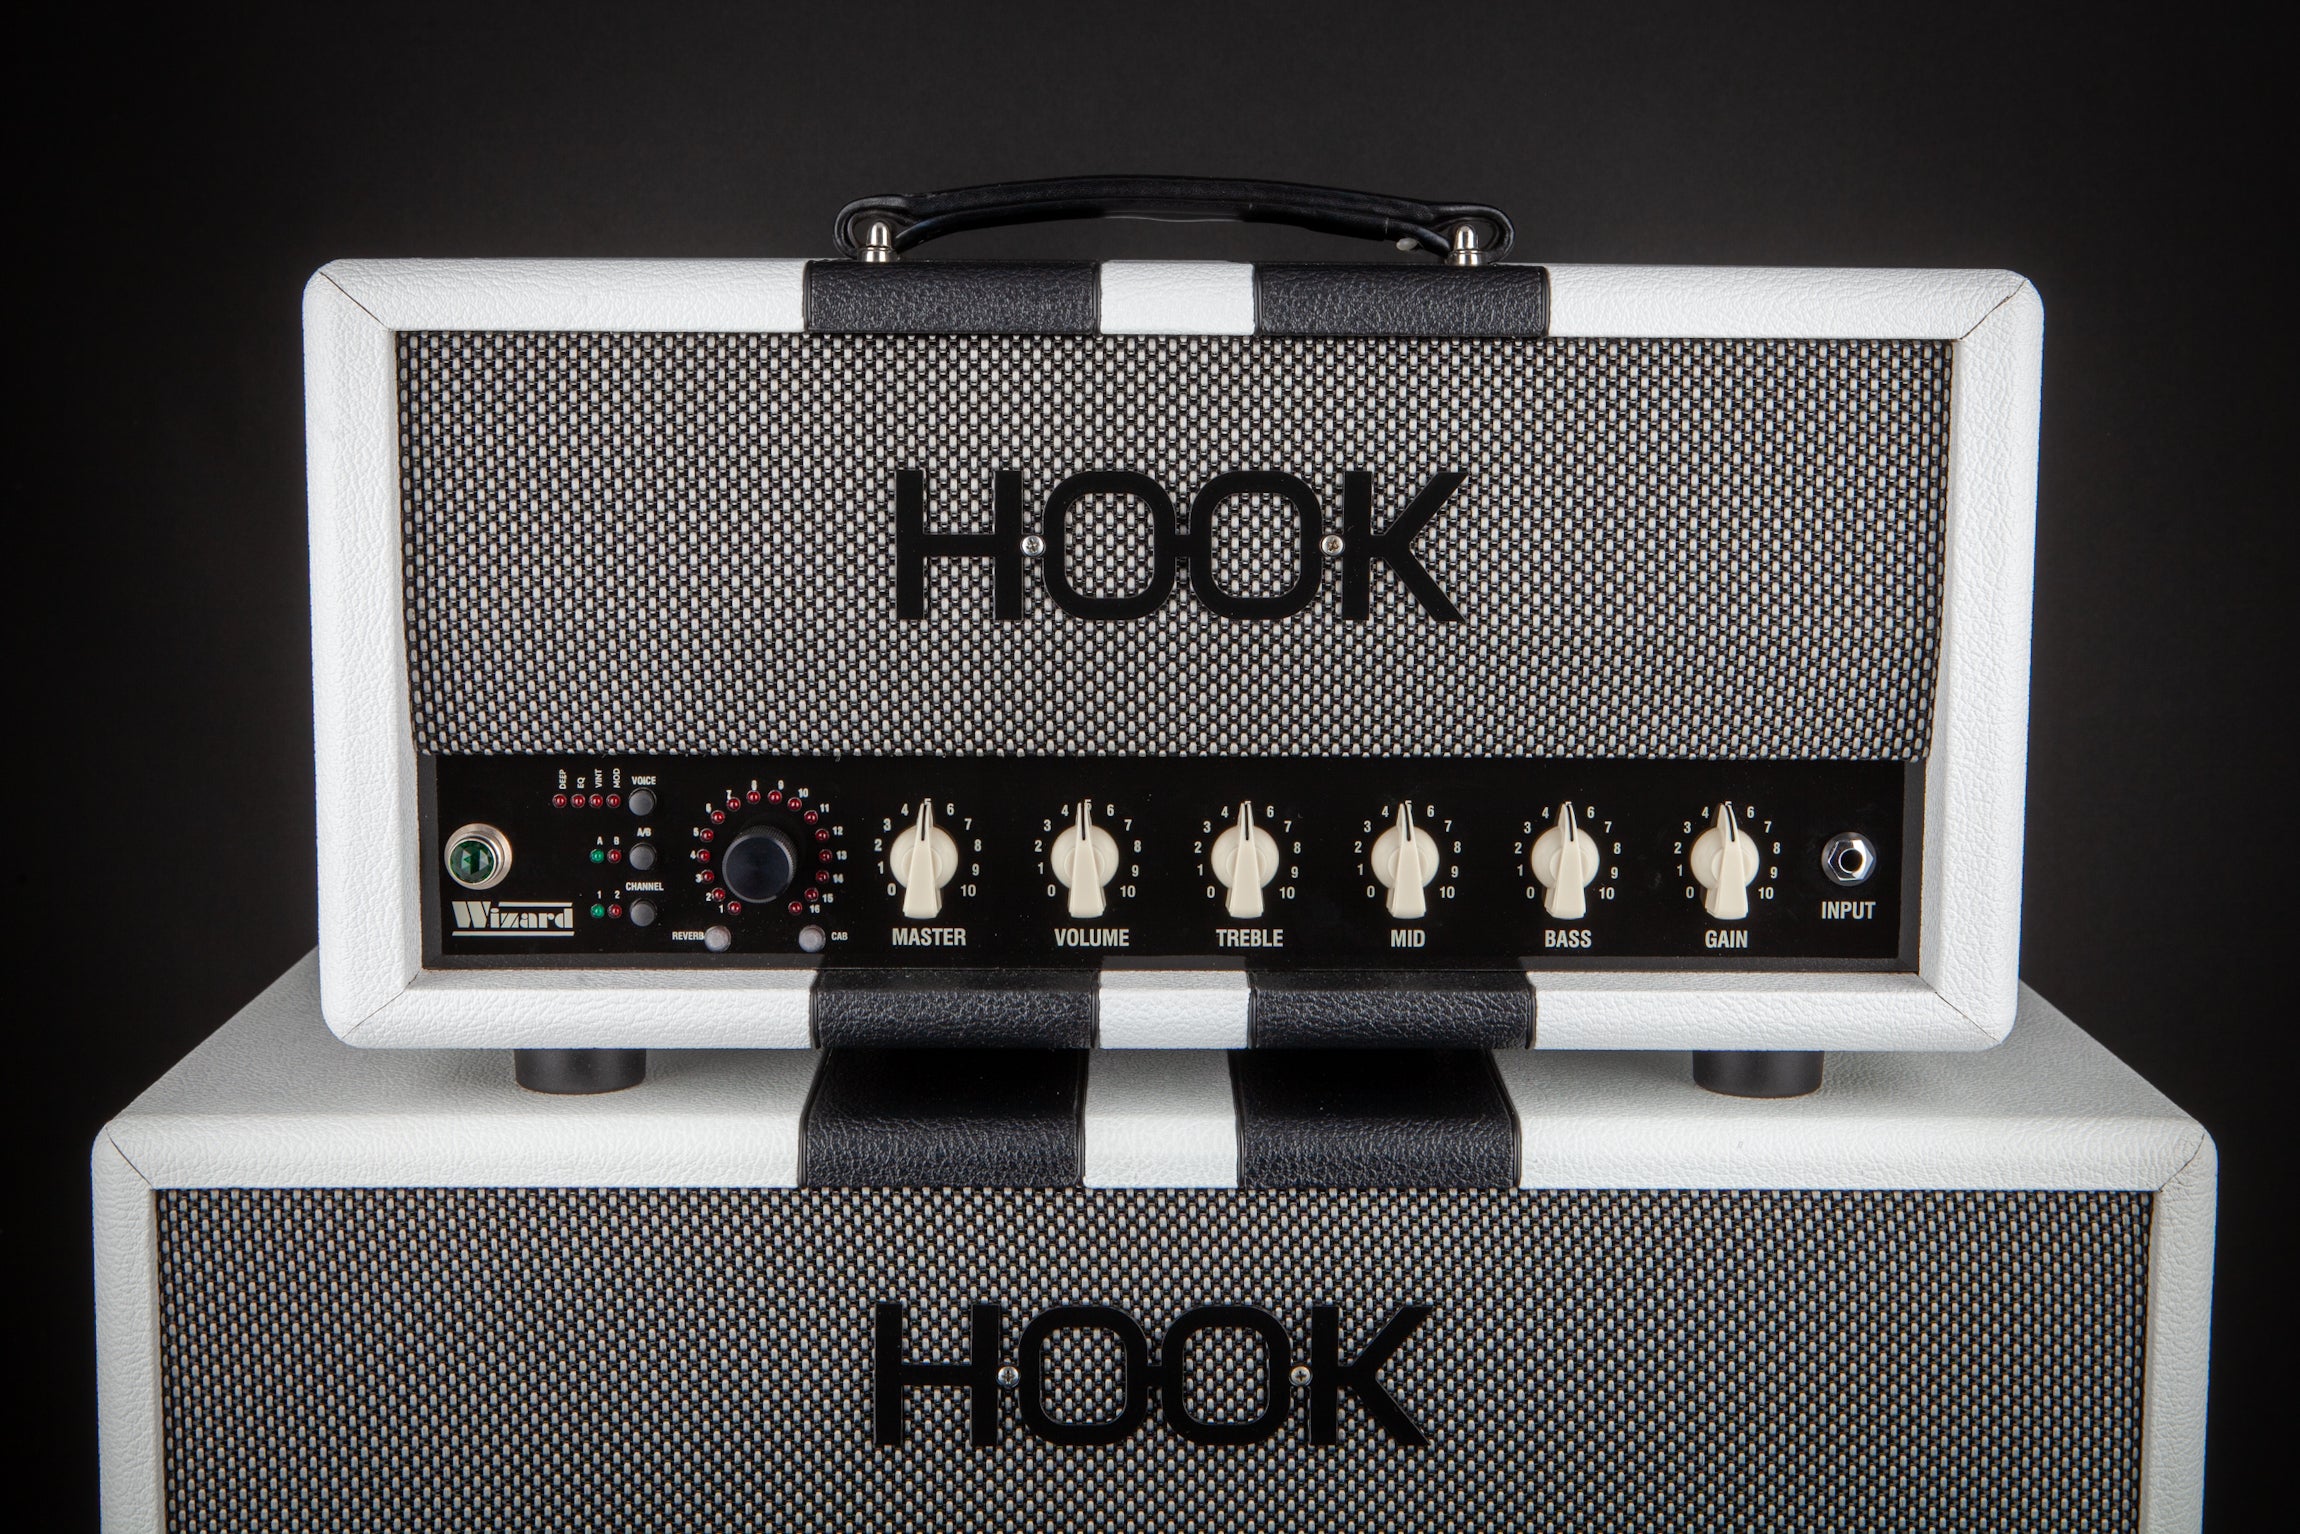 Hook Wizard 45w Vale Head and 1X12 Cab - White With Black Stripes